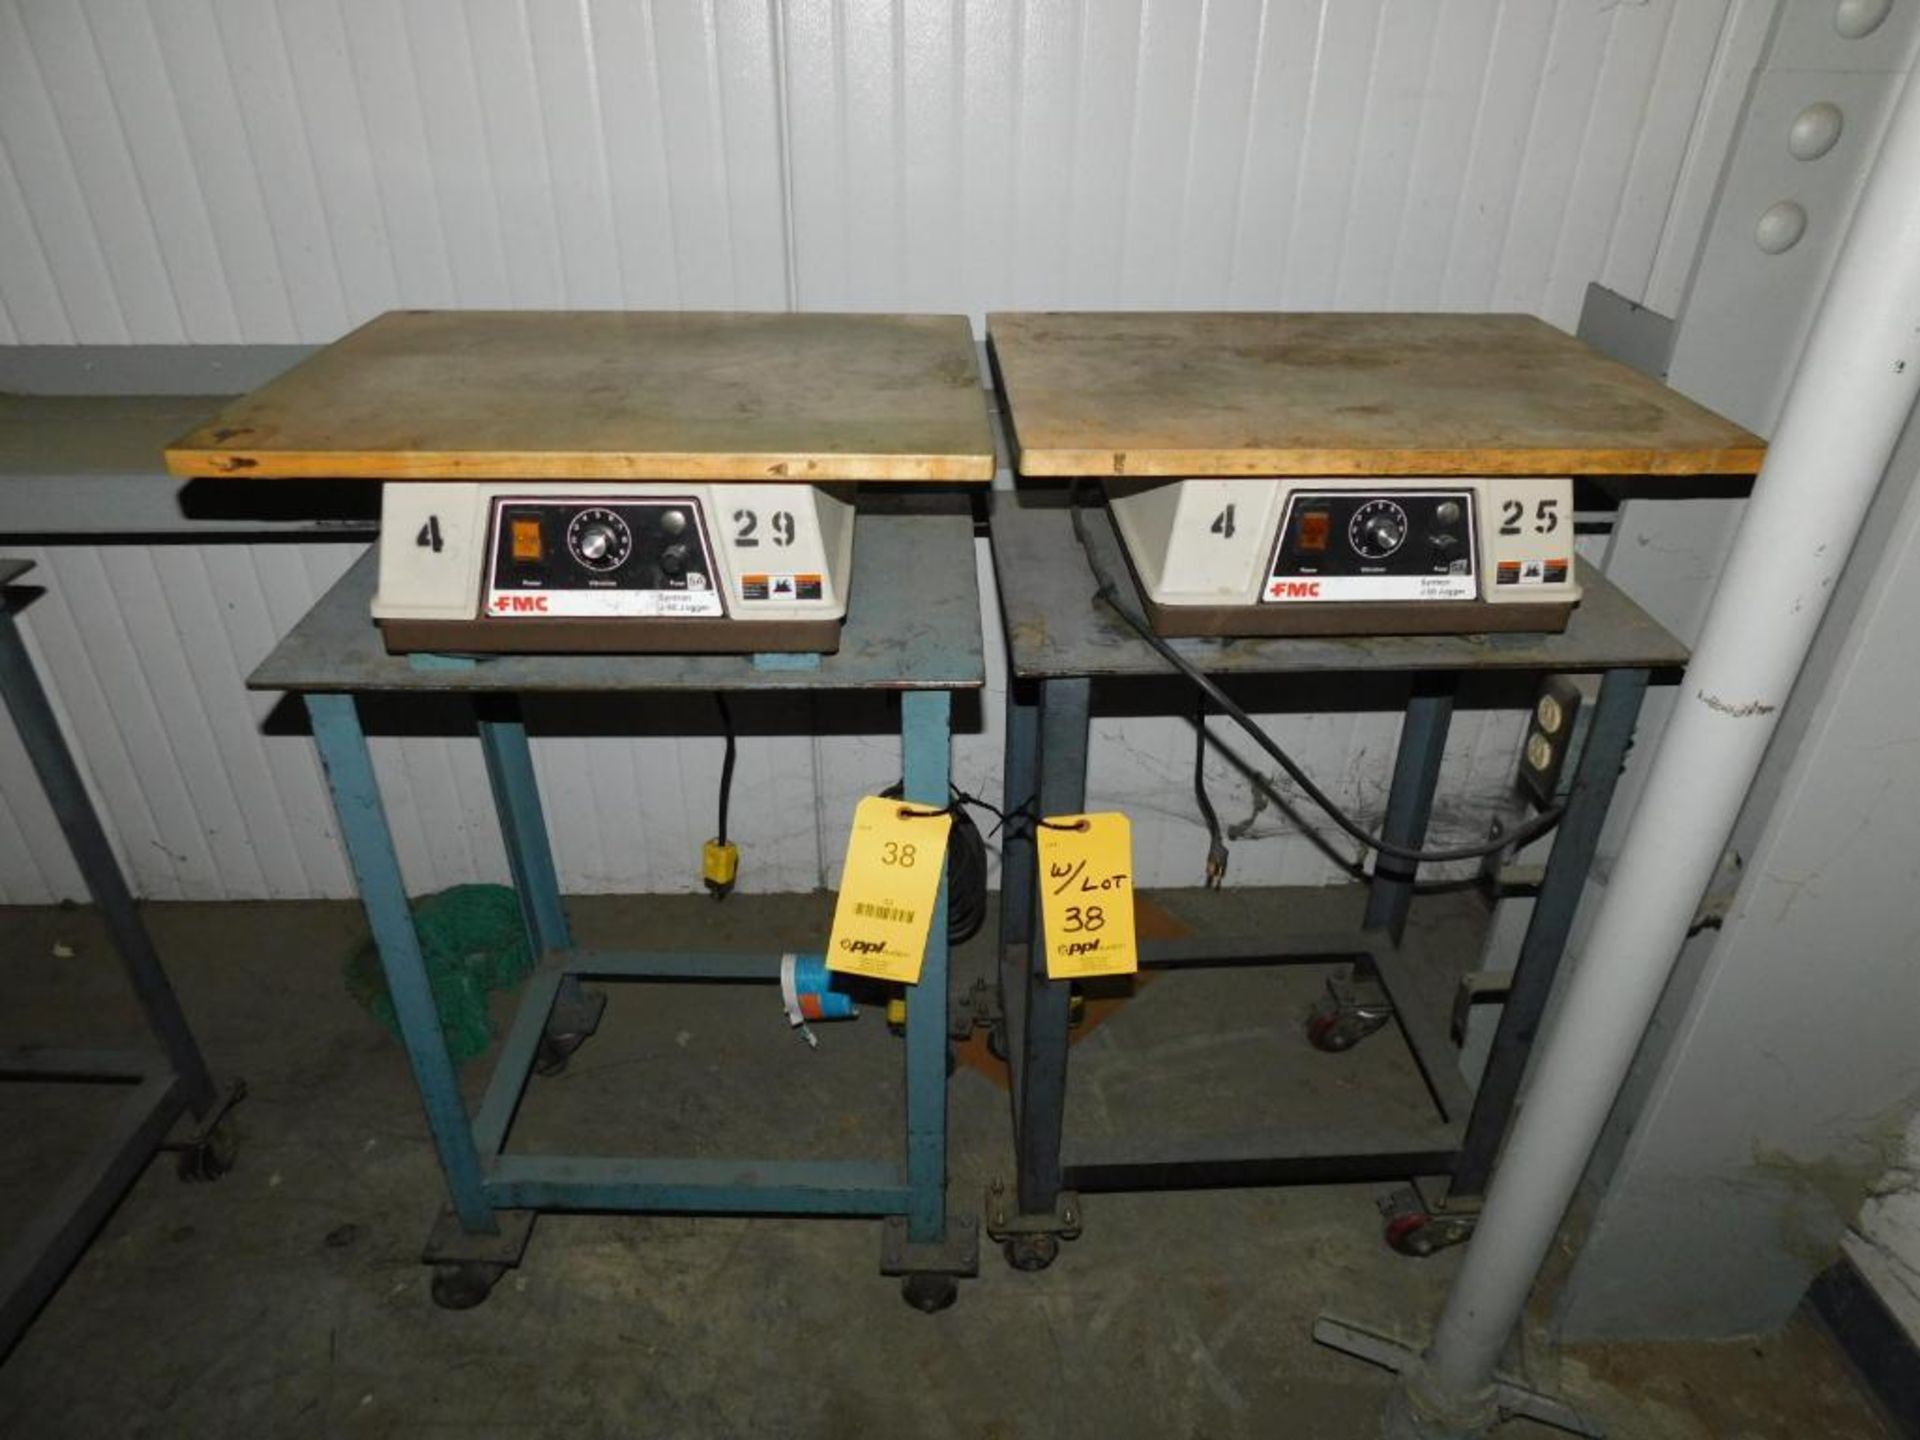 LOT: (2) FMC Syntron J-50 Paper Joggers w/22" x 17" Flat Deck on Rolling Stand (LOCATION: IN MAIL RO